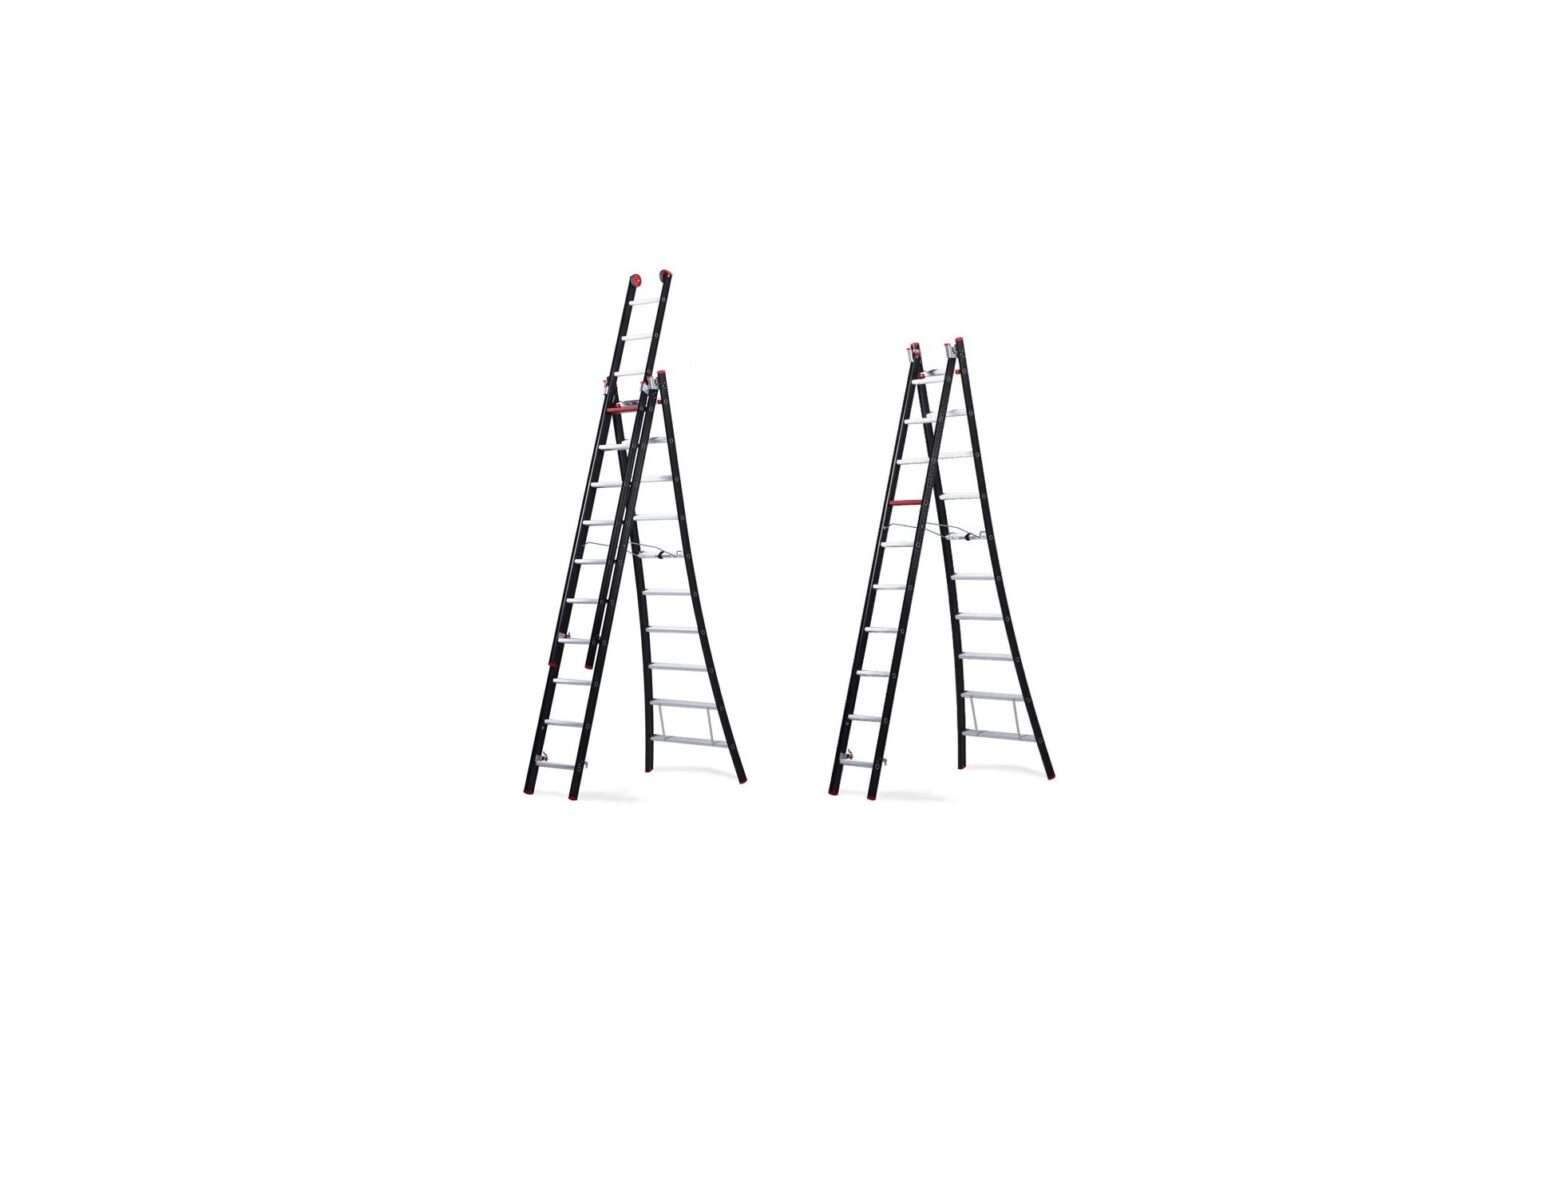 altrex Nevada 2-part Reform Ladder Instructions - Featured image